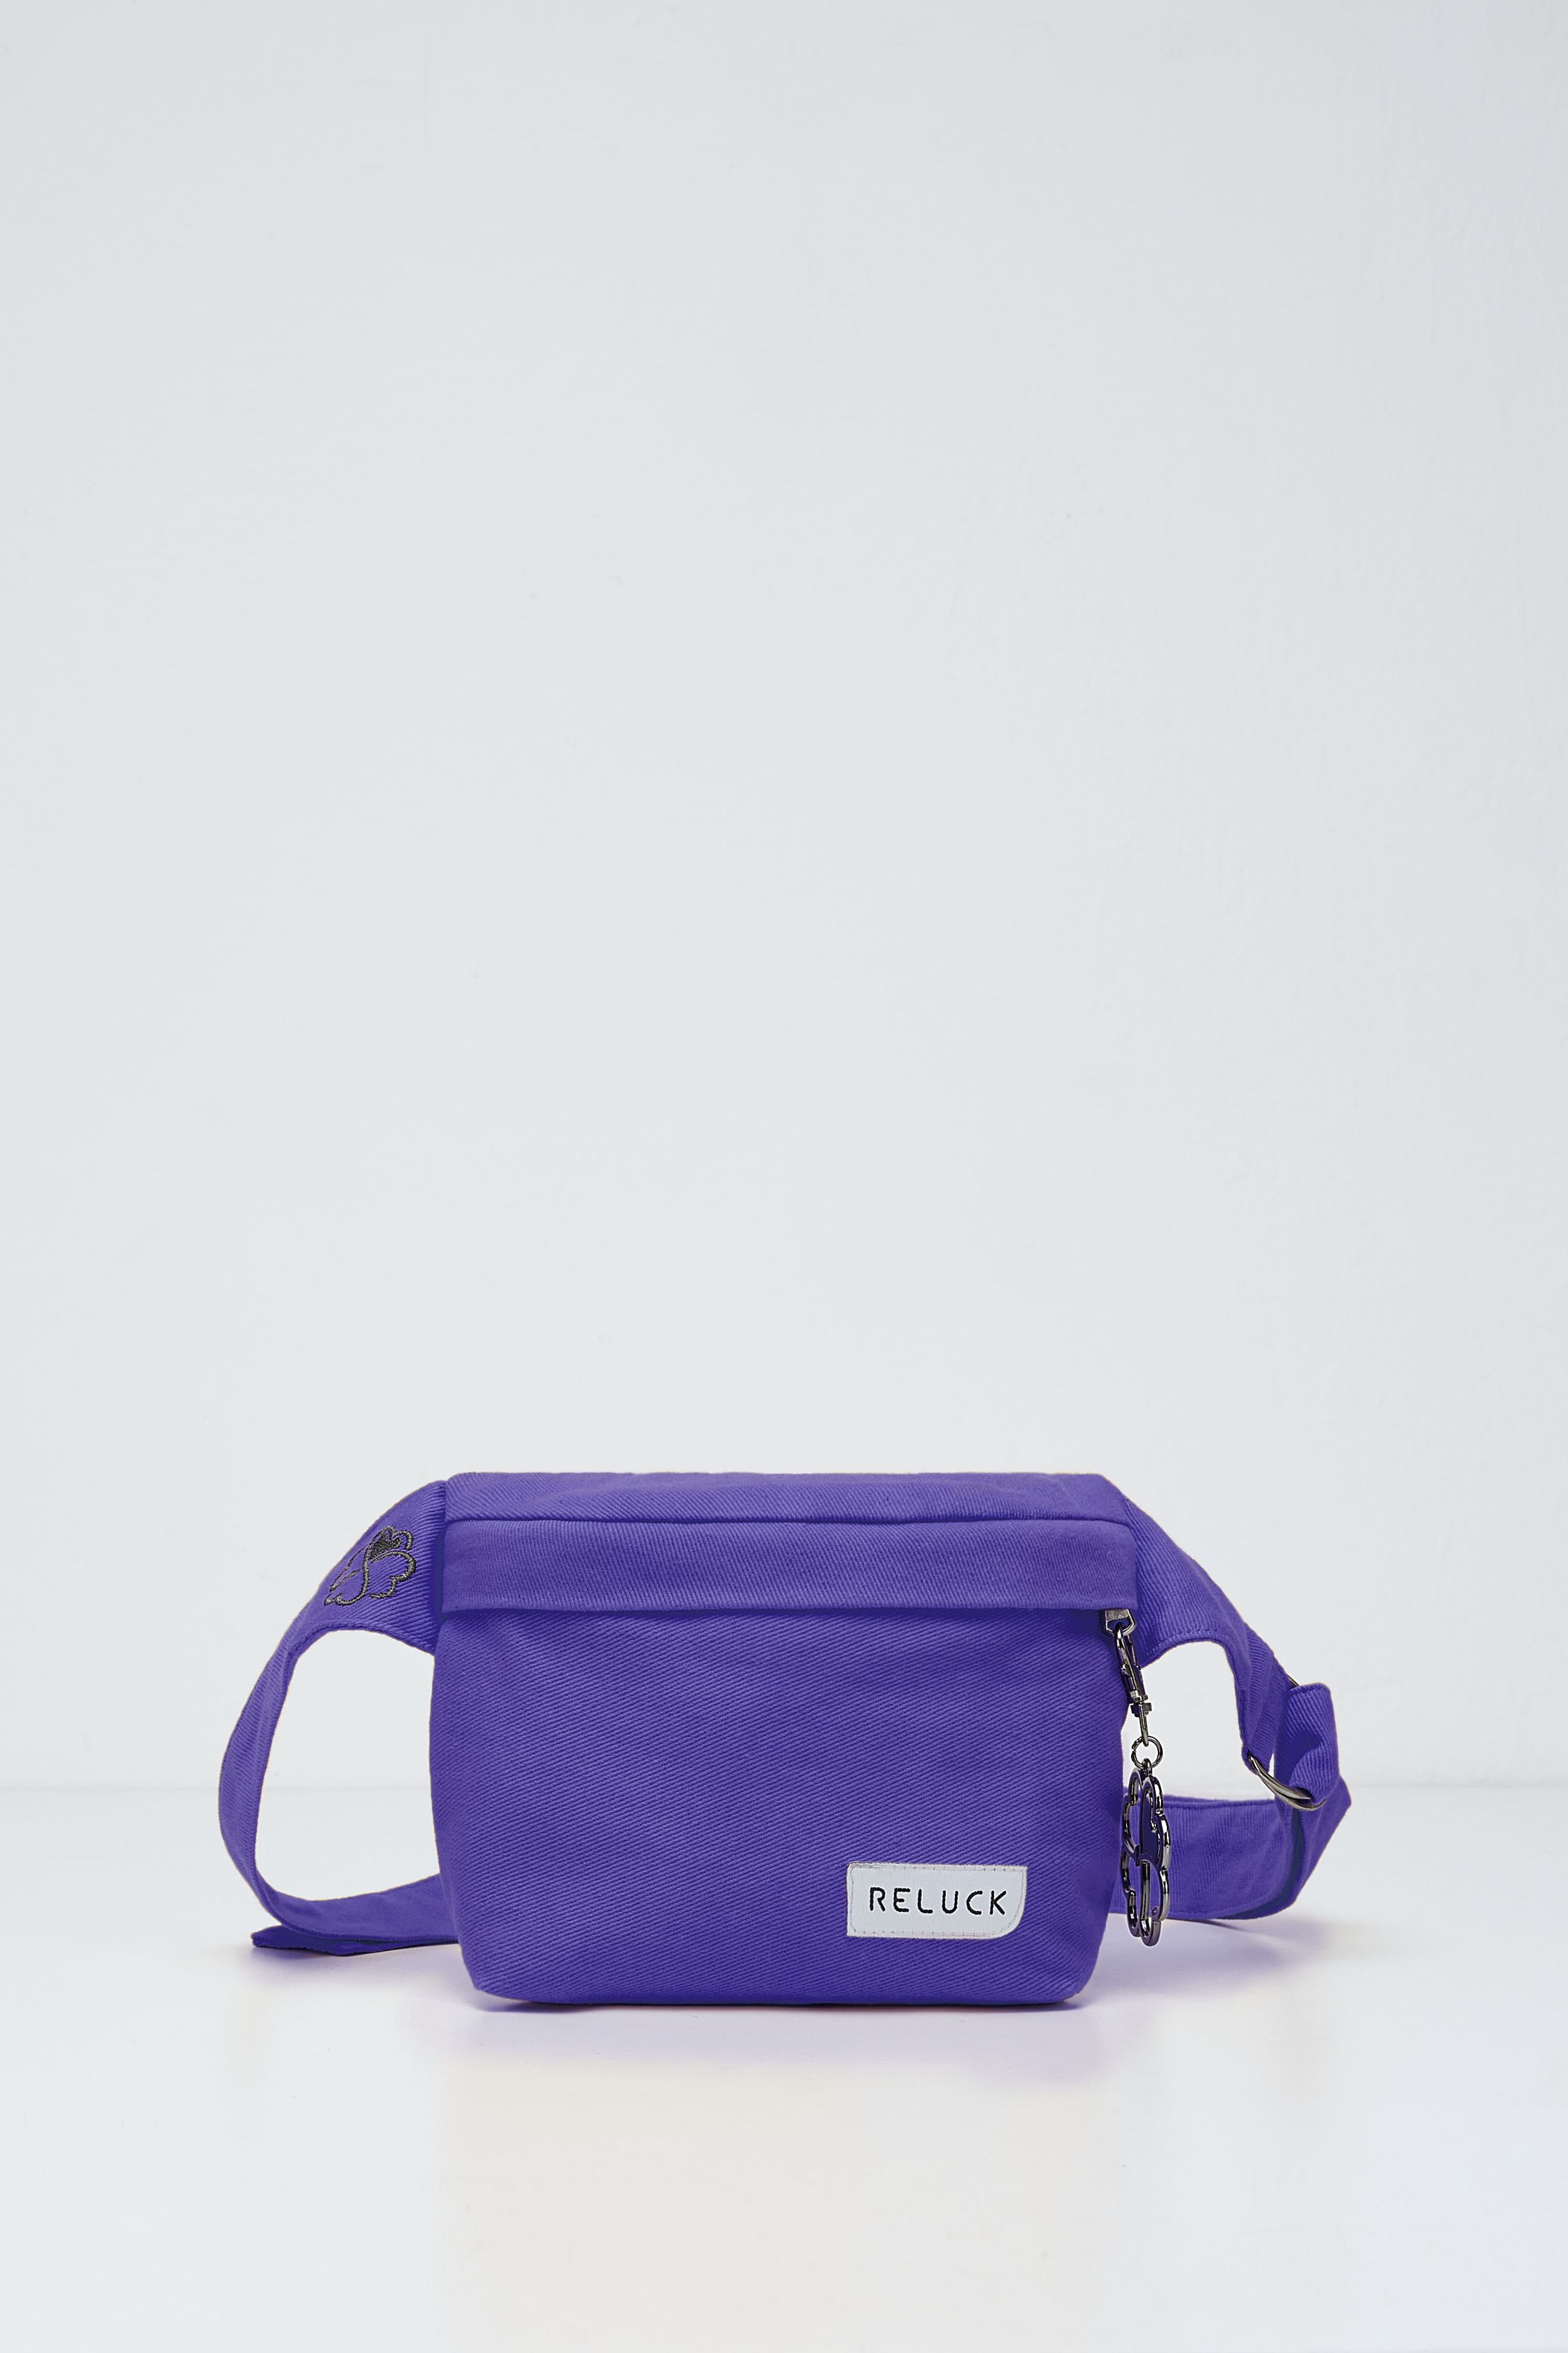 %100 RECYCLED FANNY BAG PURPLE